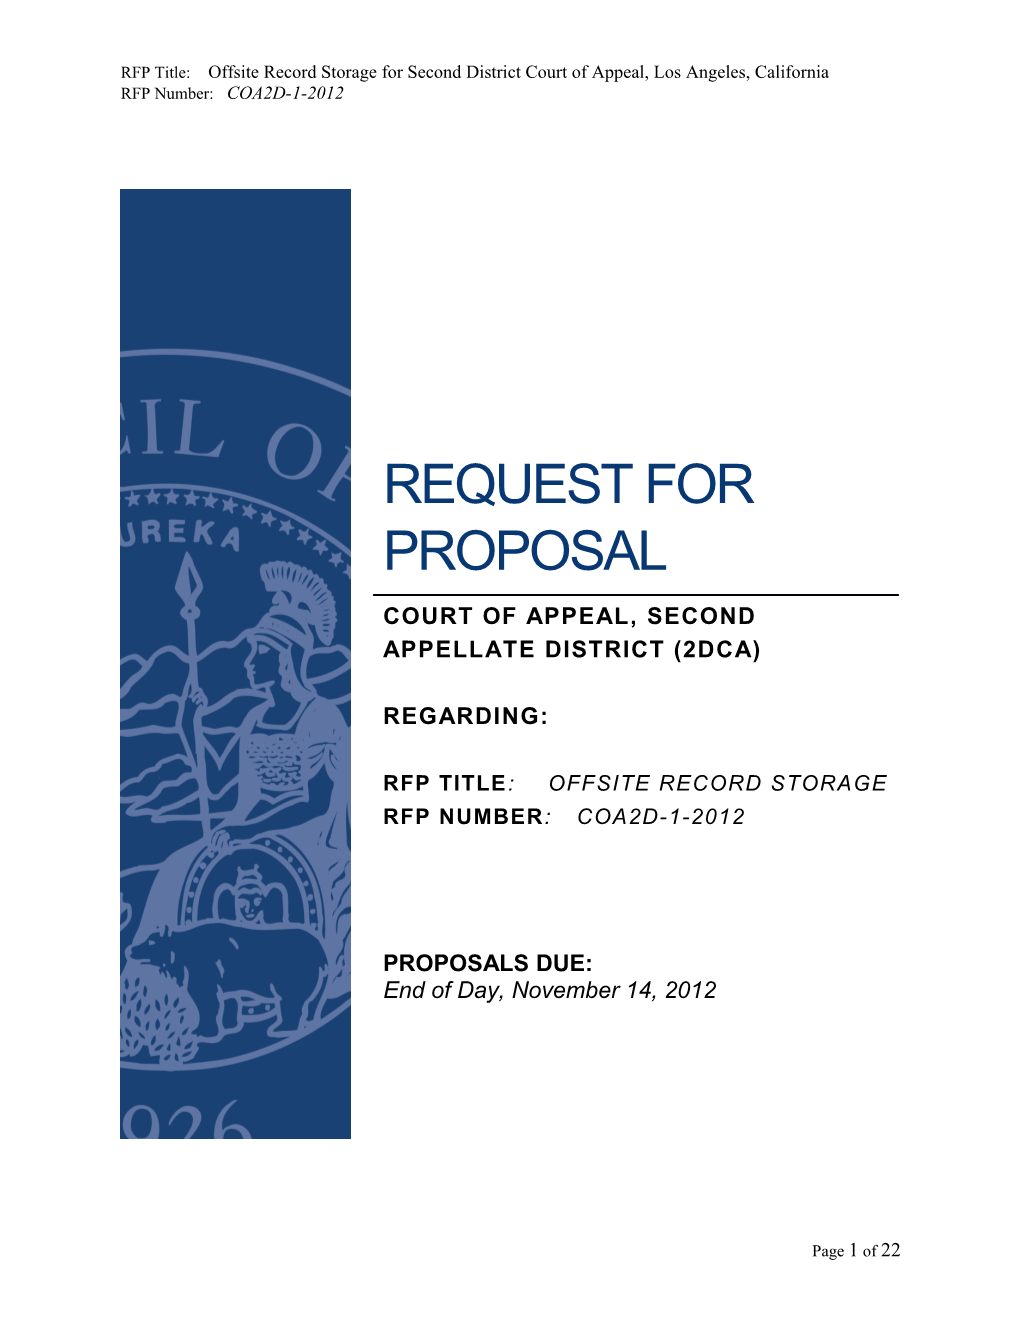 RFP Title: Offsite Record Storage for Second District Court of Appeal, Los Angeles, California